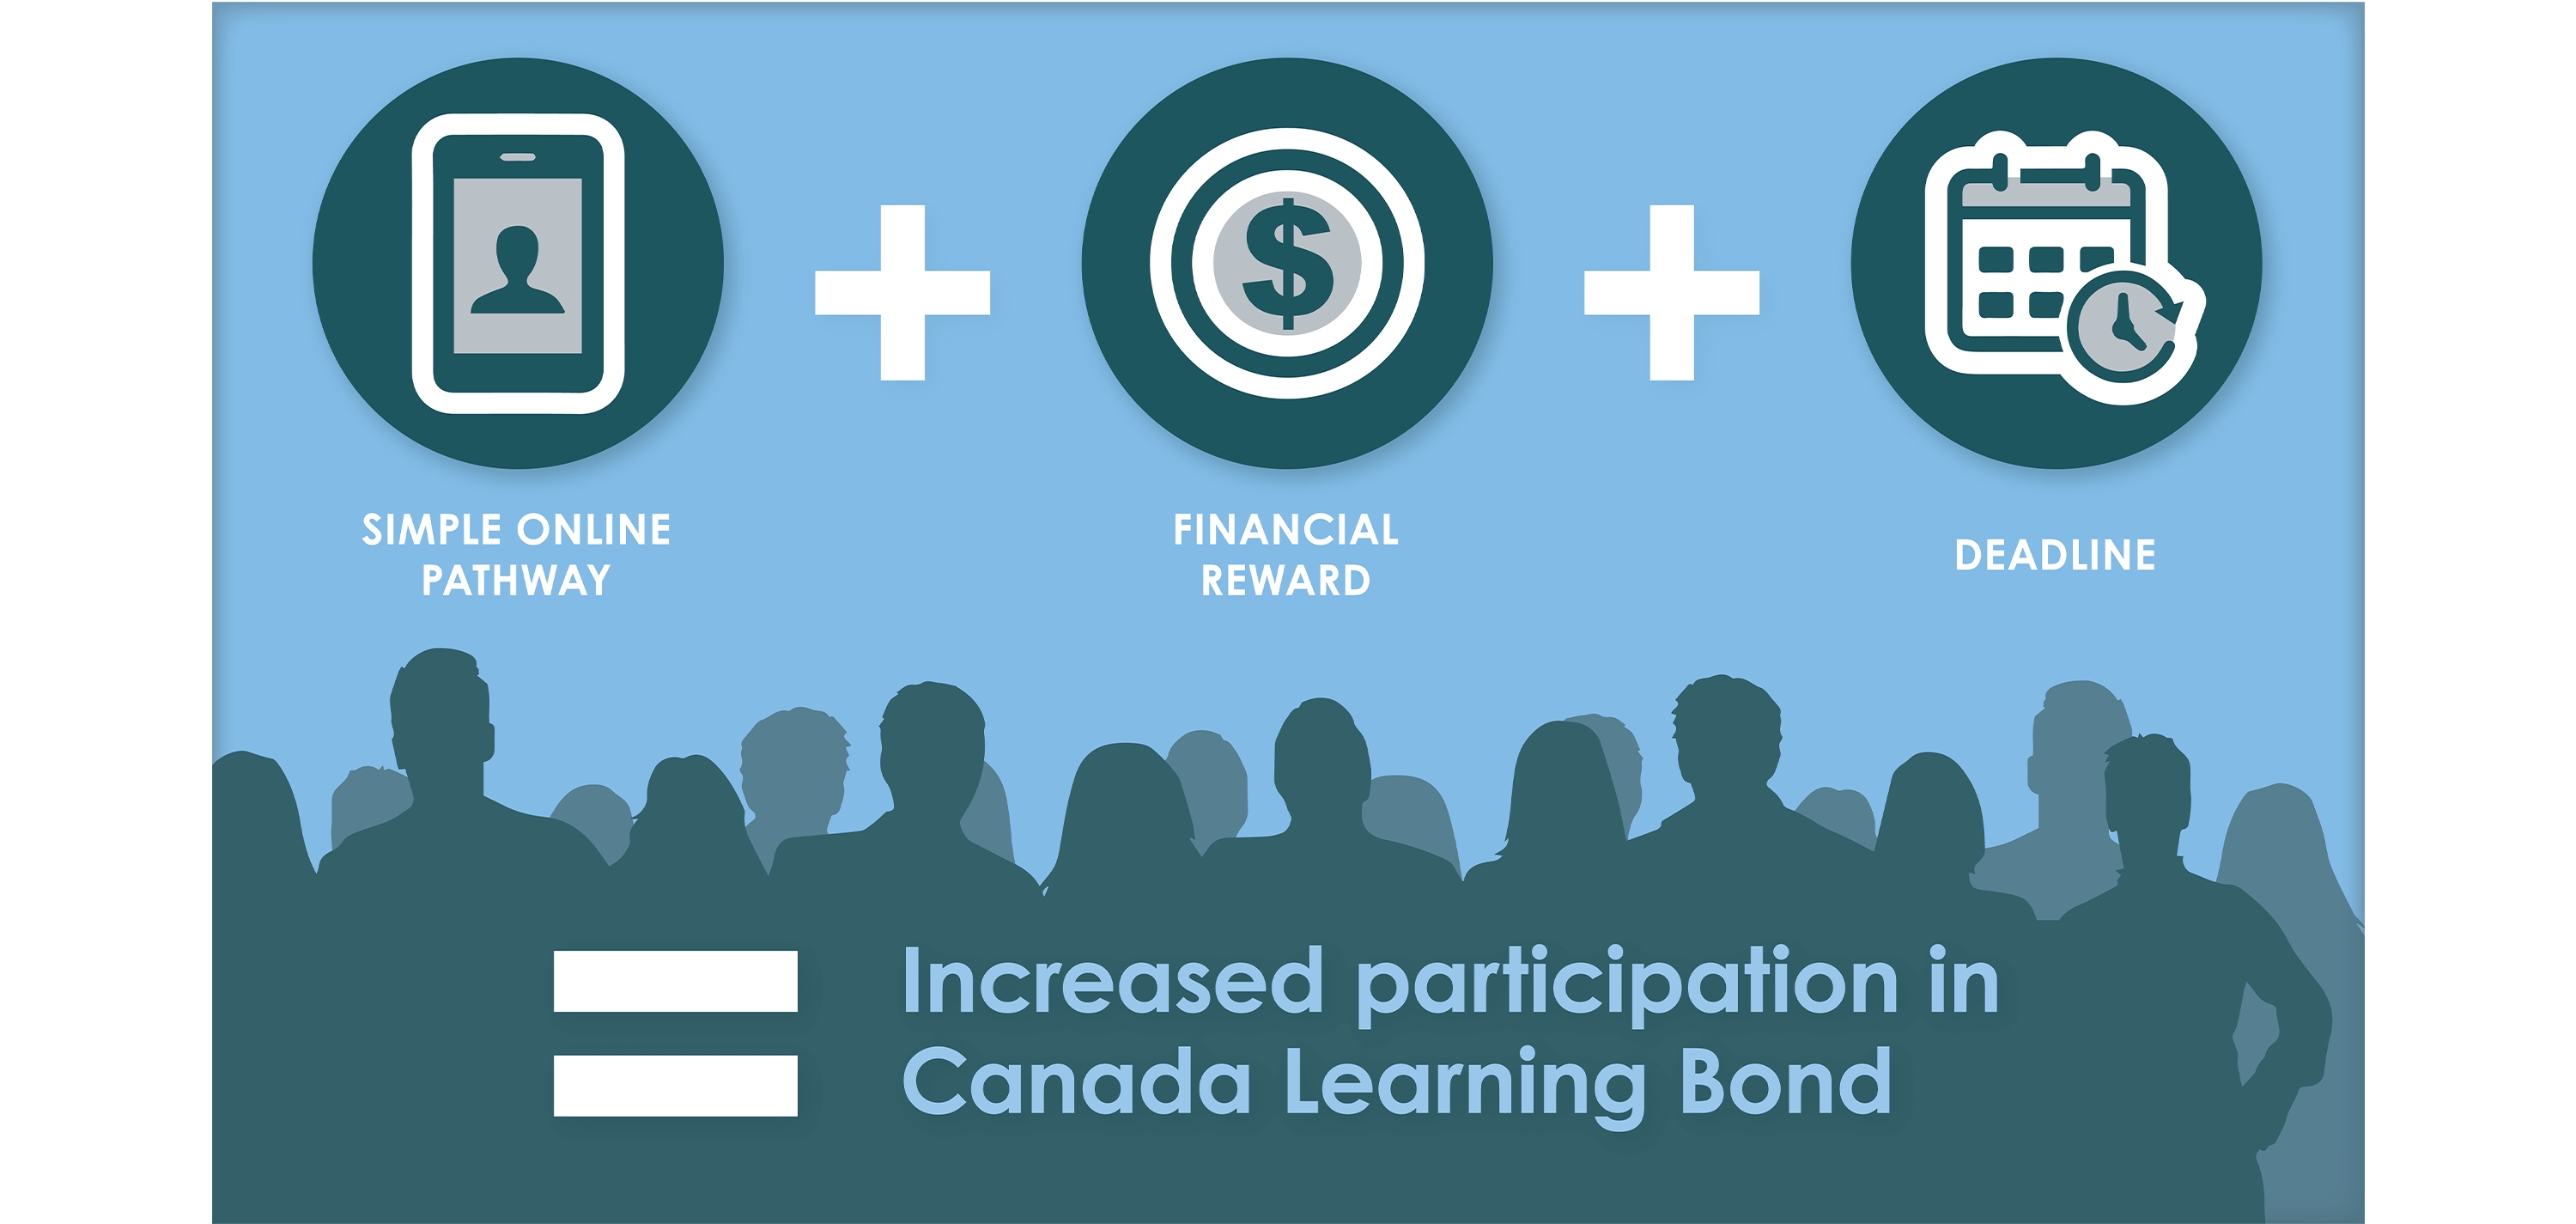 Simple online pathway + Financial reward + deadline = Increased participation in Canadian Learning Bond